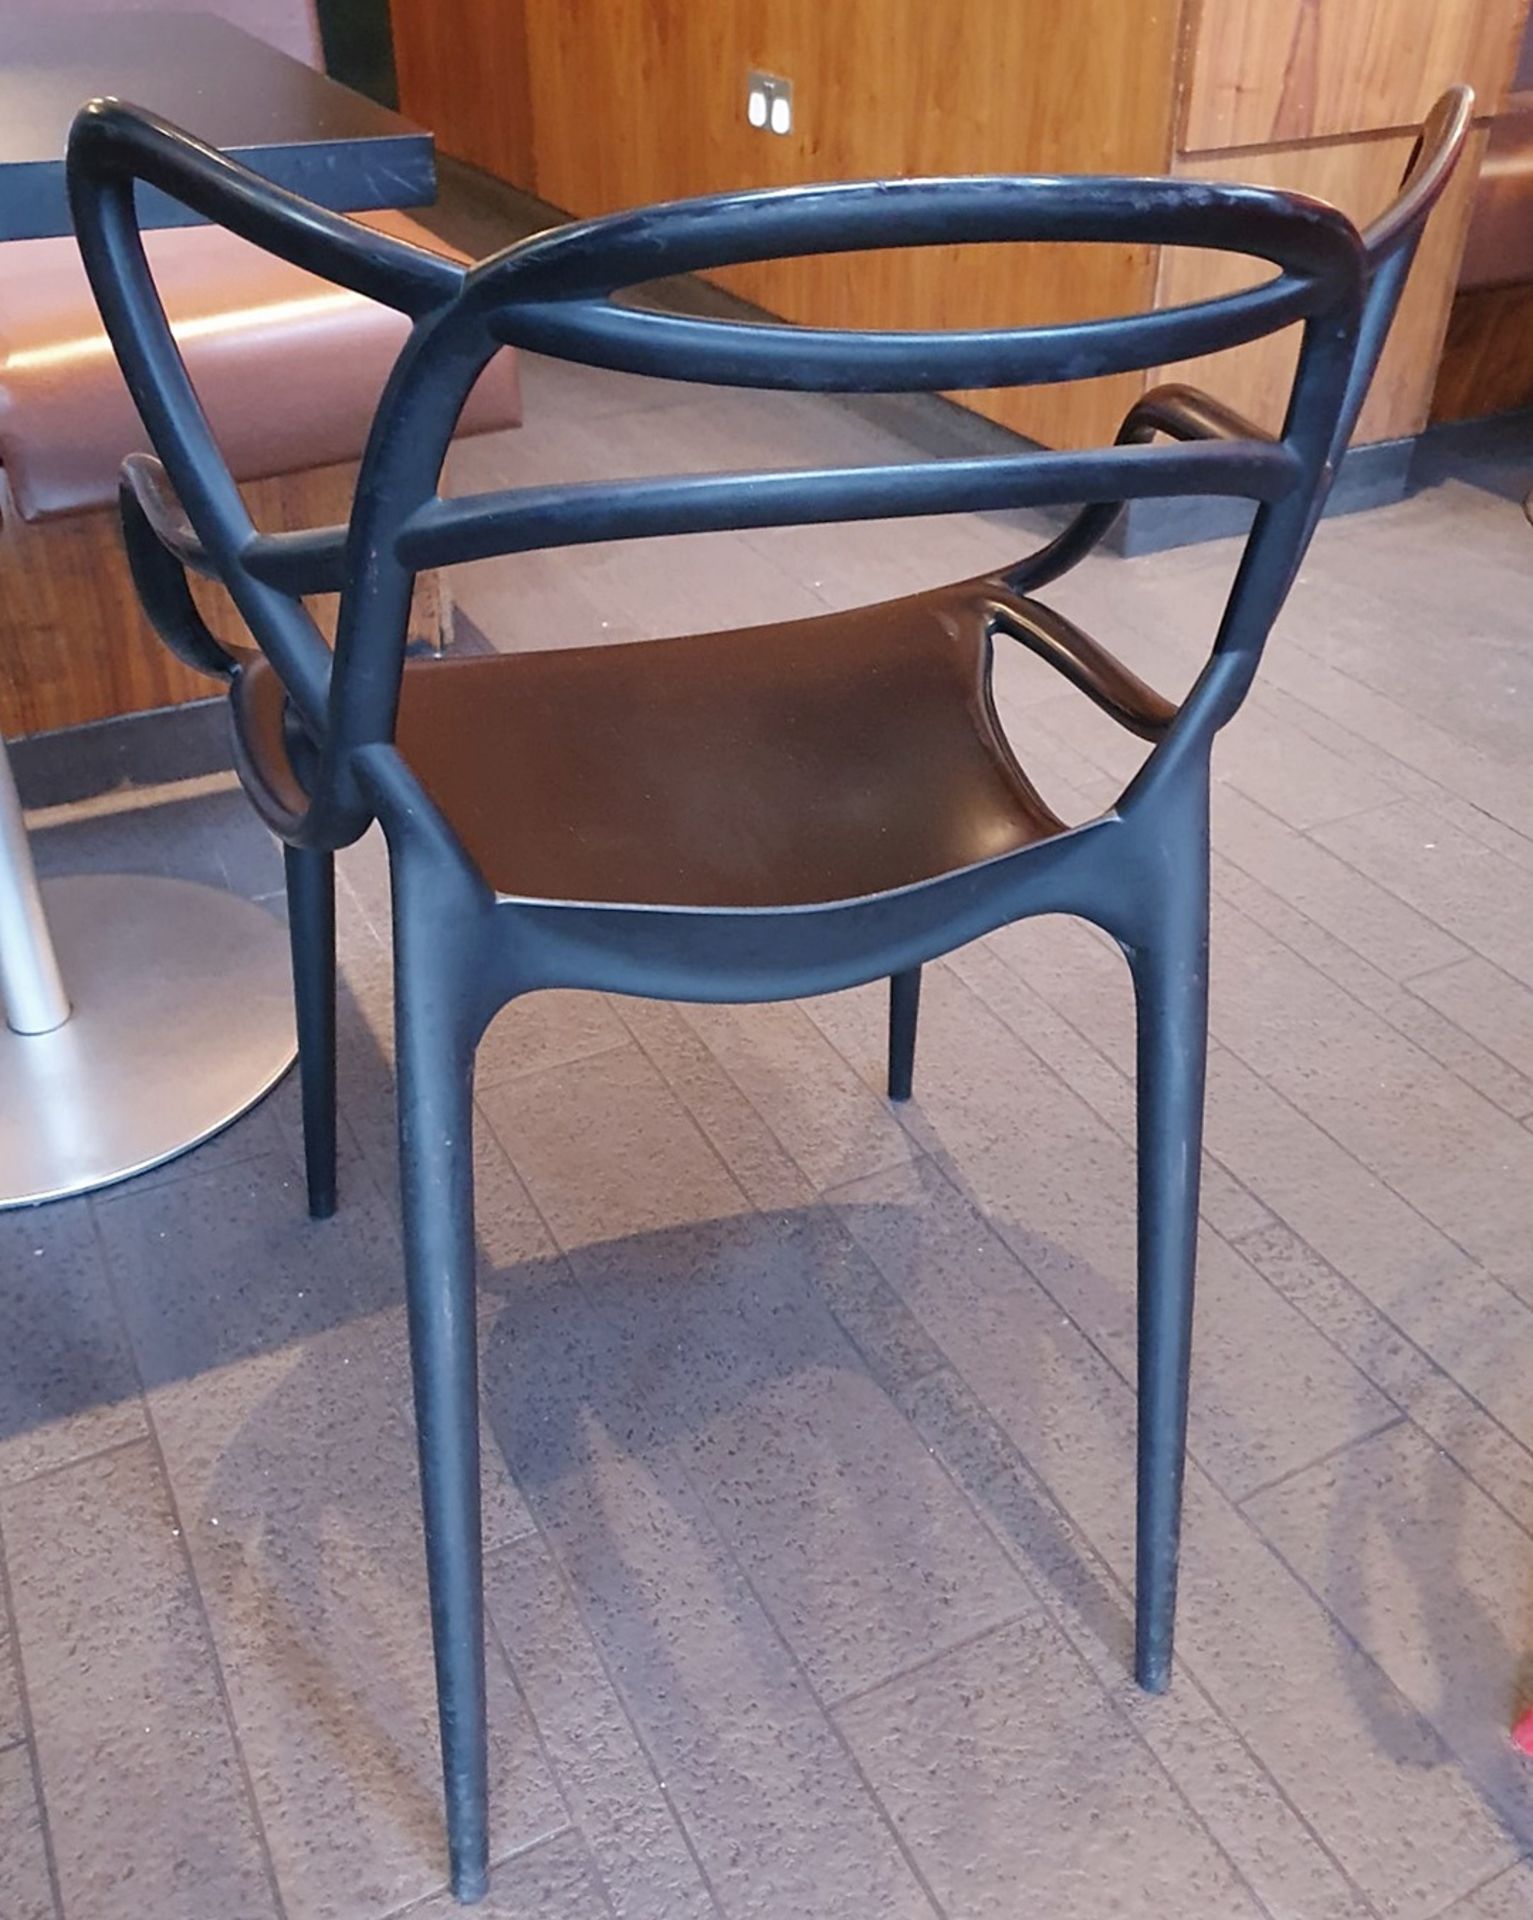 1 x Philippe Starck Inspired 'Masters' Designer Black Gloss Bistro Chair - BRE008 - Image 3 of 3